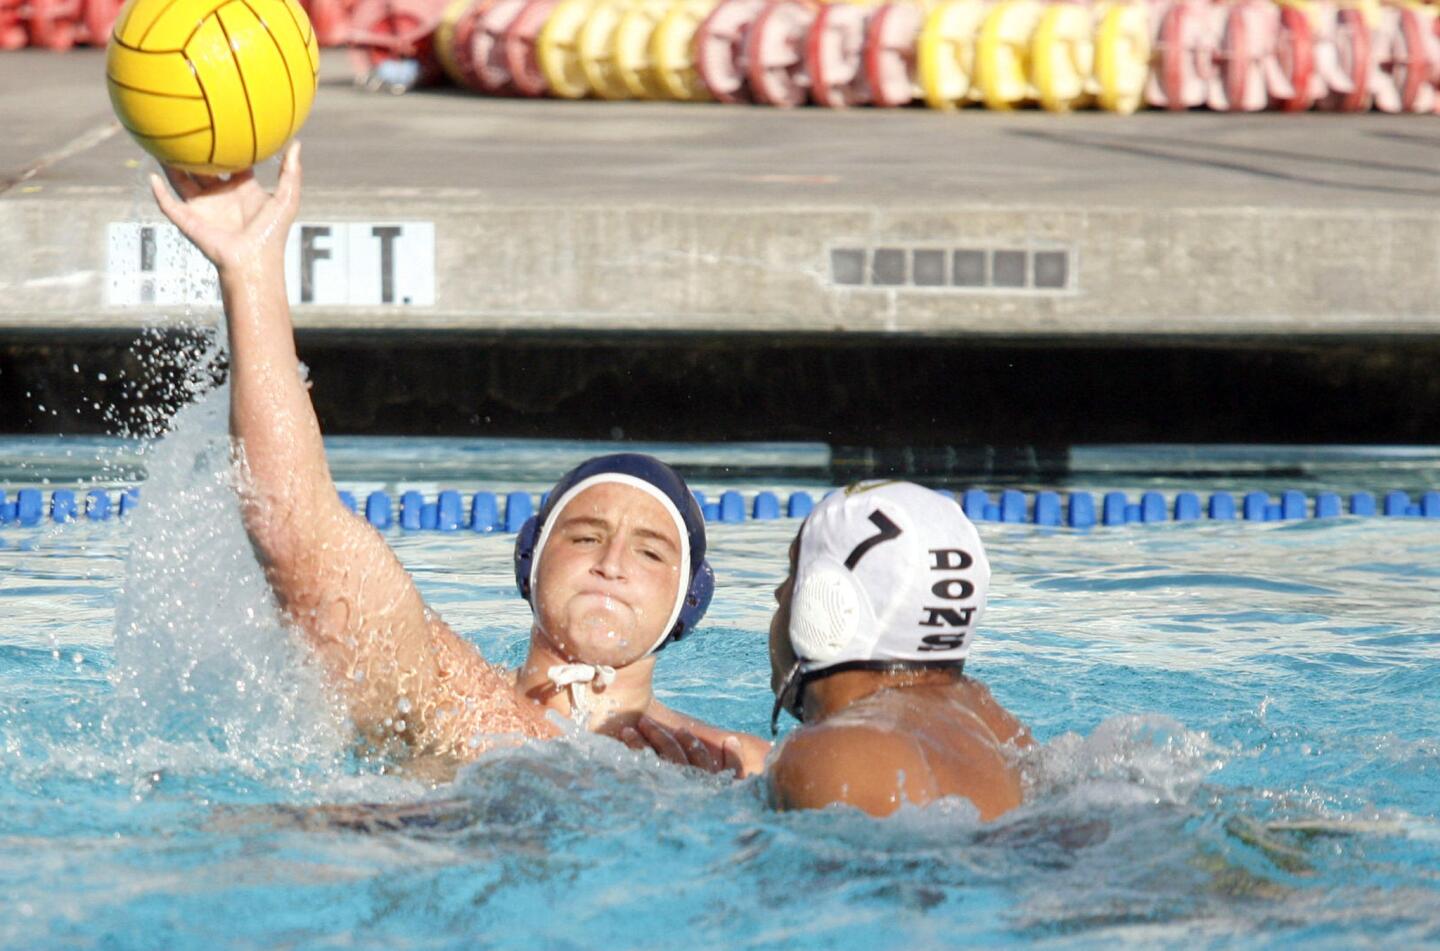 CV's Griffin Harting, left, passes the ball while Cerritos' Michael Hanna defends Harting during a match at PCC on Wednesday, October 3, 2012.